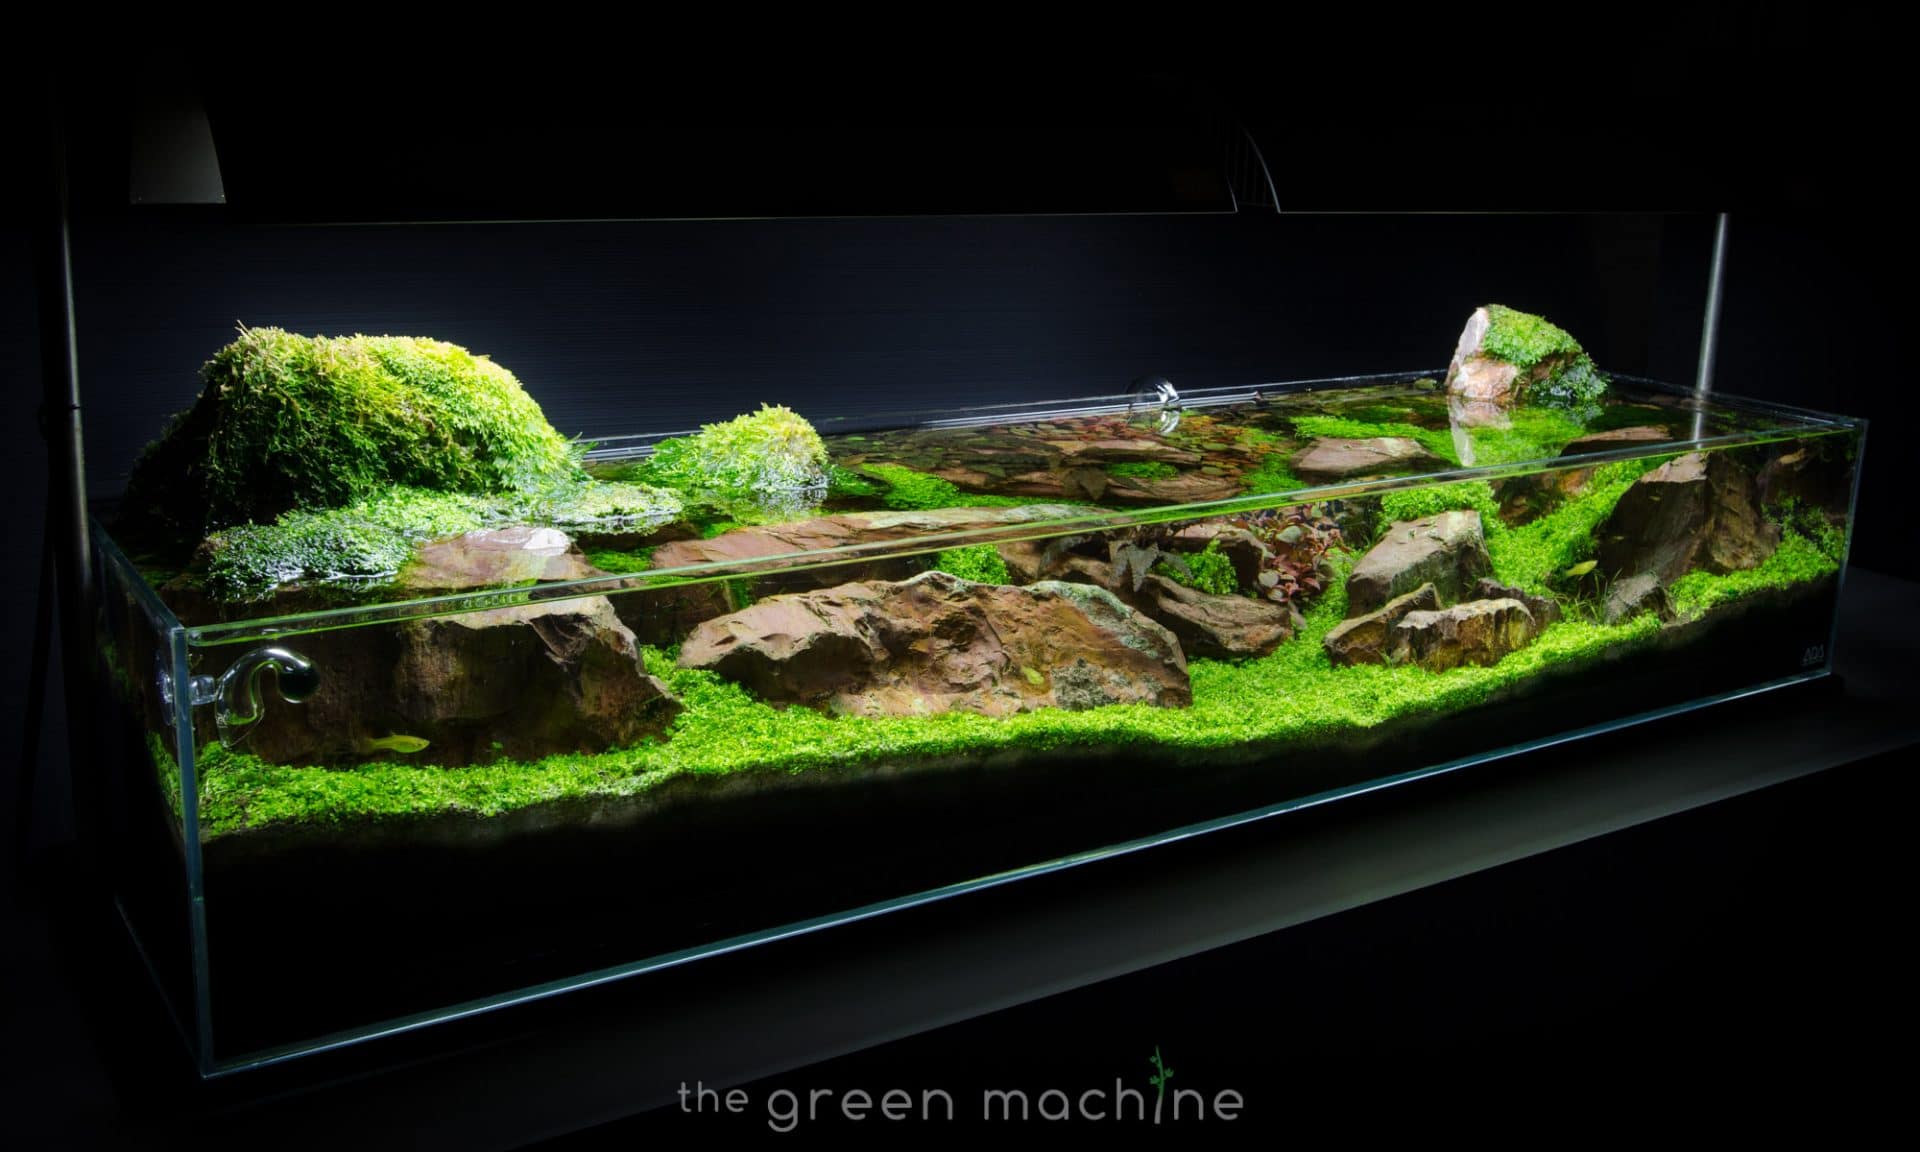 Continuity Aquascape Video & Gallery by James Findley – Aquascape